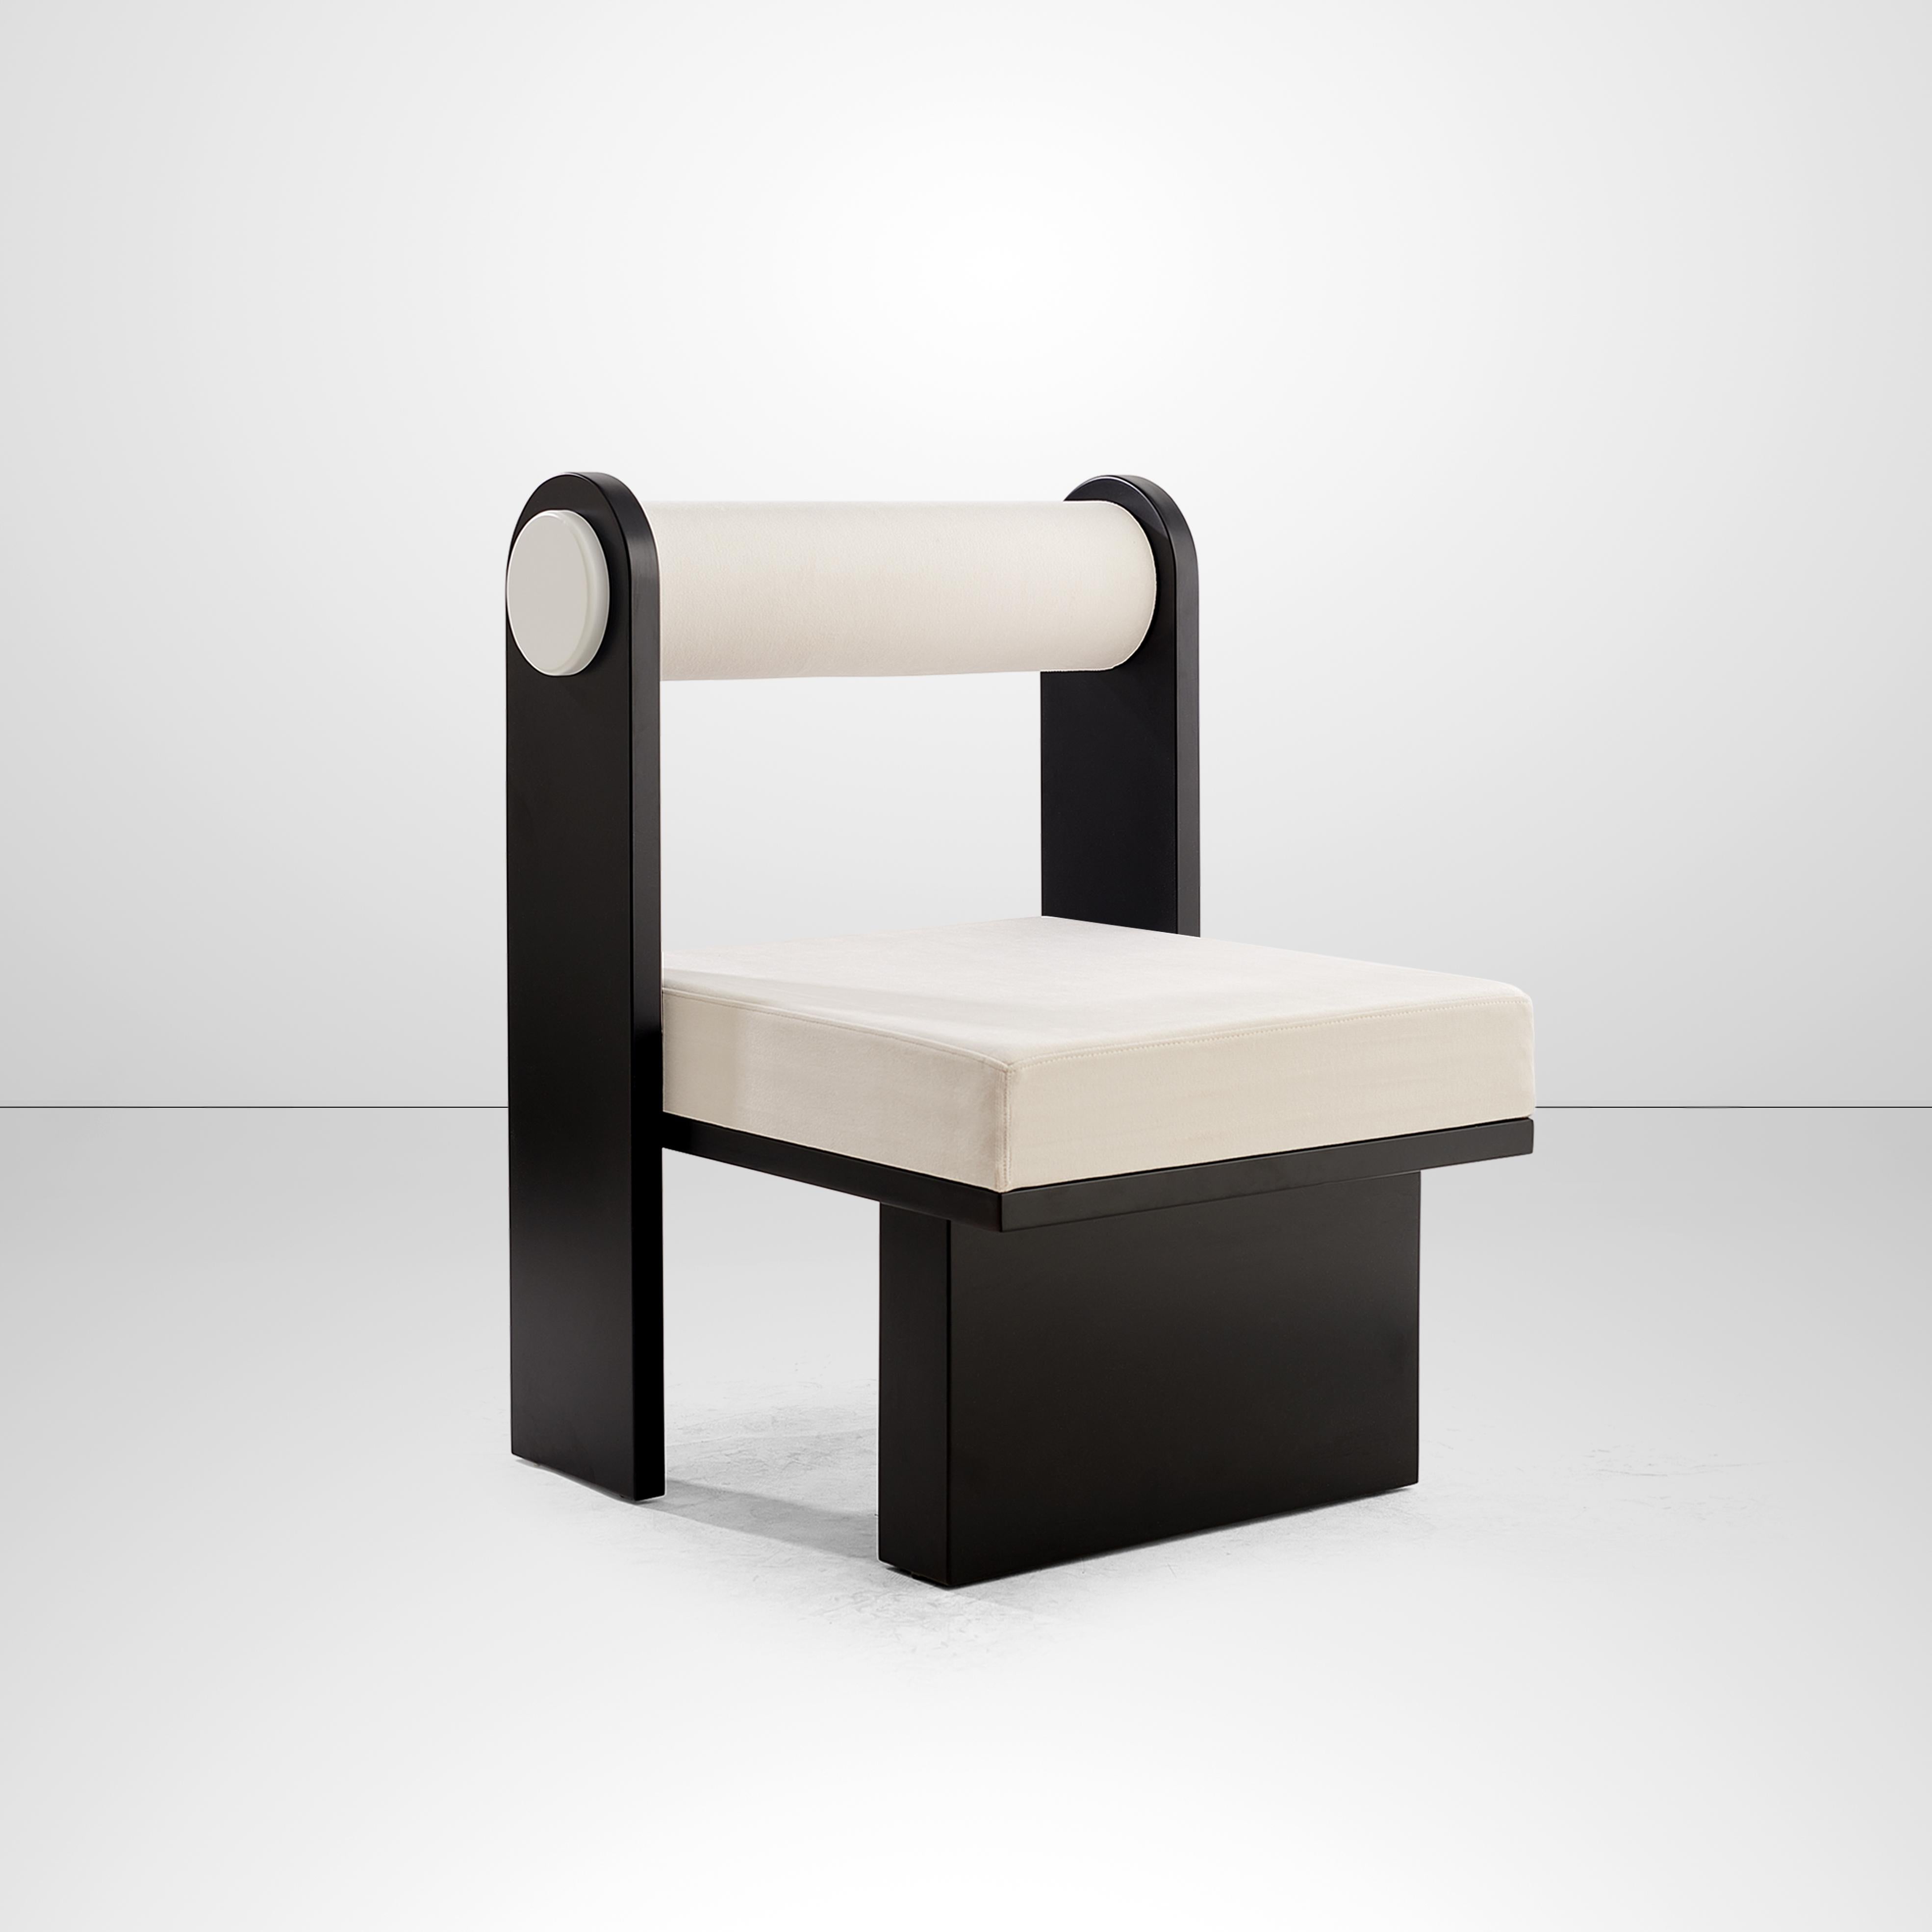 Panda lounge chair by Melis Tatlicibasi.
Materials: White velvet upholstery, laquered natural oak
Dimensions: W 55 x D 65 x H 85 cm.

The Panda collection is a minimalist work with some far eastern touches. Inspired by the shy and playful